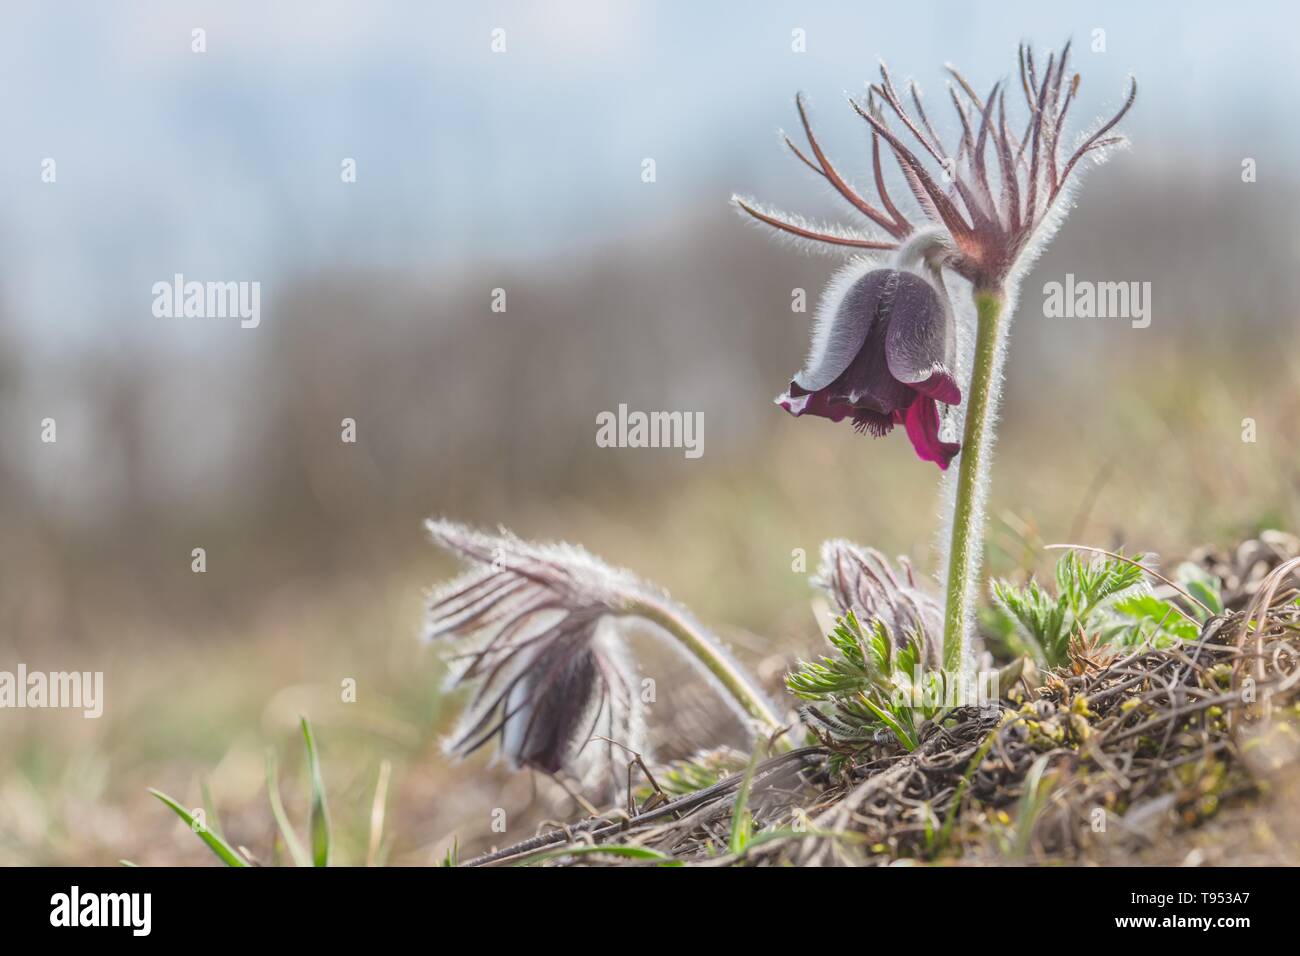 Fragile wind flower, meadow anemone, pasque flower with dark purple cup like flower and hairy stalk growing in meadow. Sunny spring day, blue sky. Stock Photo